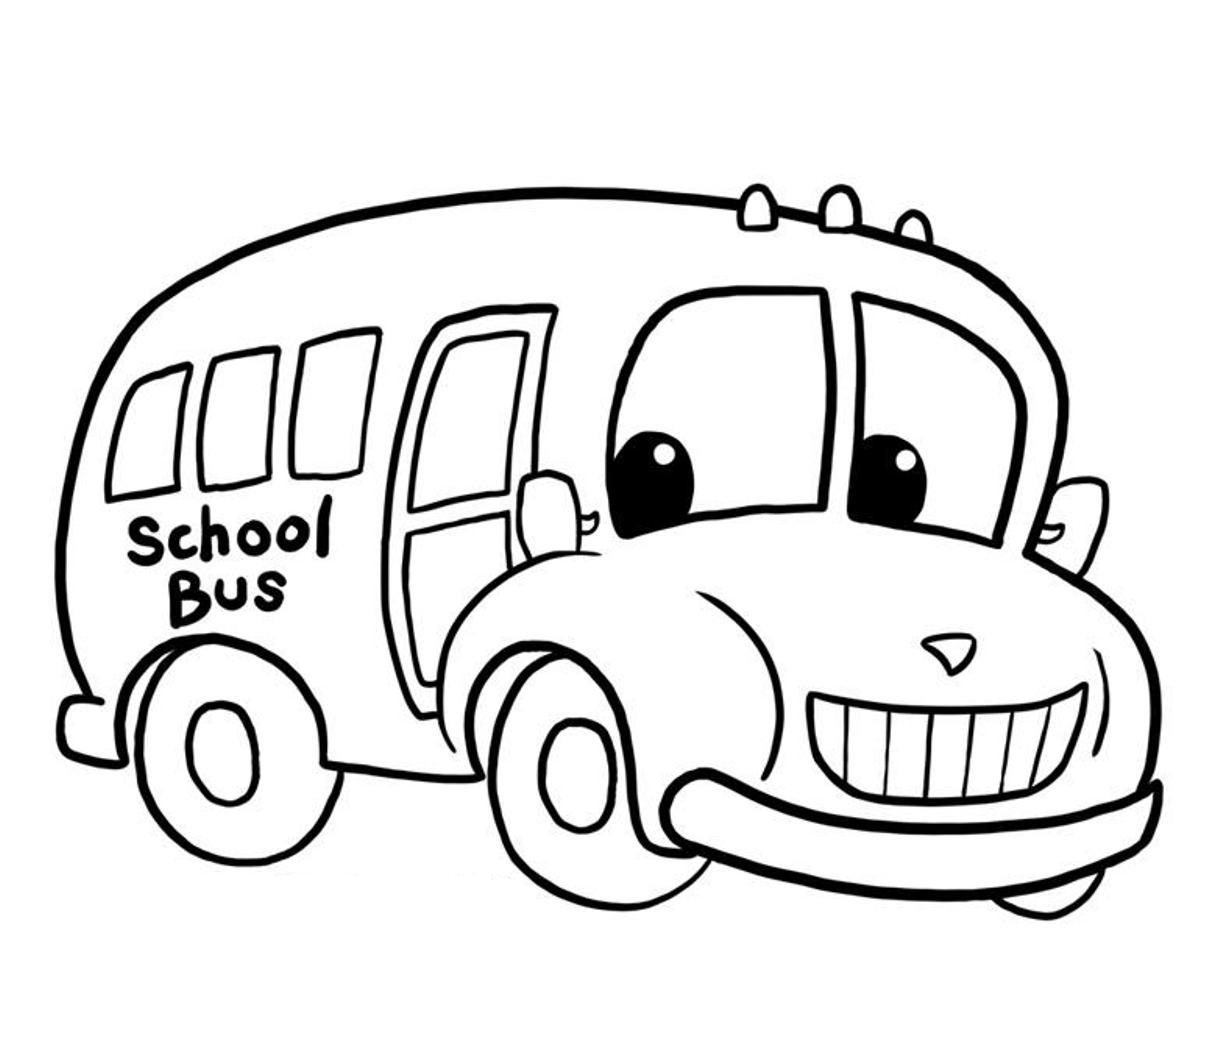 Printable School Bus Coloring Page | Transportation Coloring pages ...